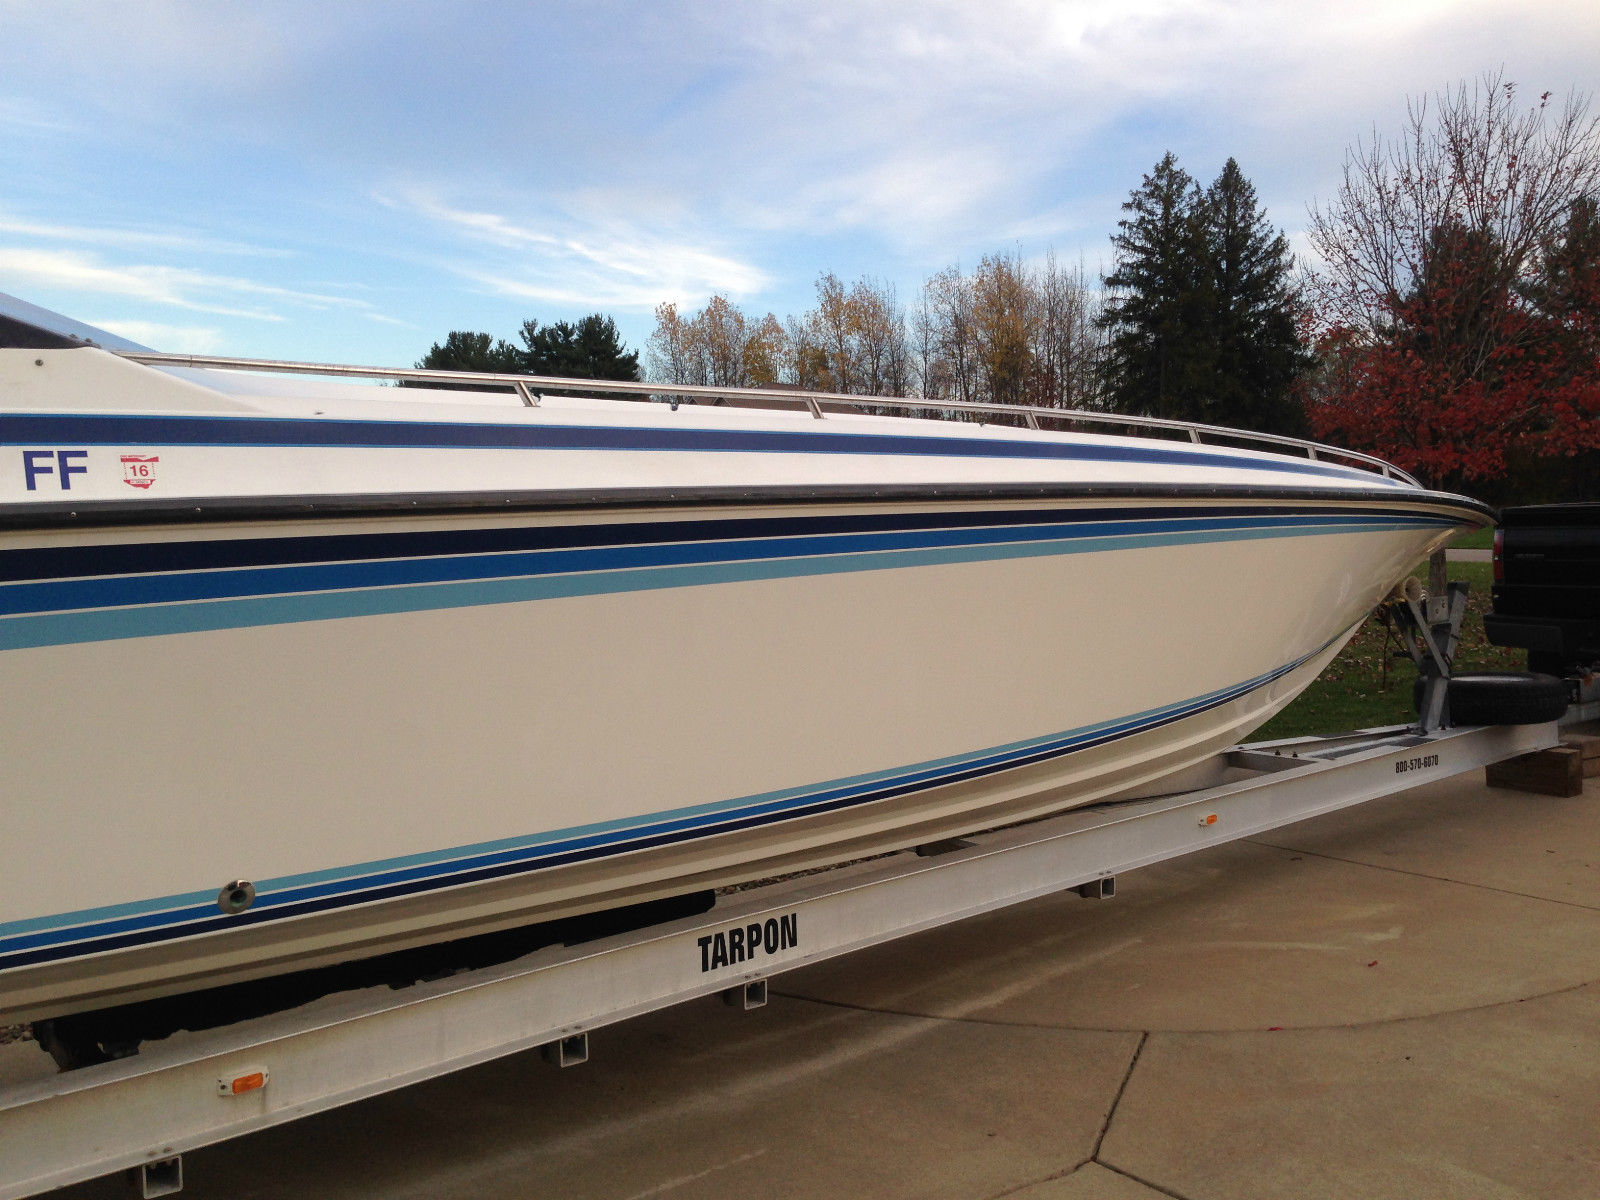 40 foot powerboat for sale